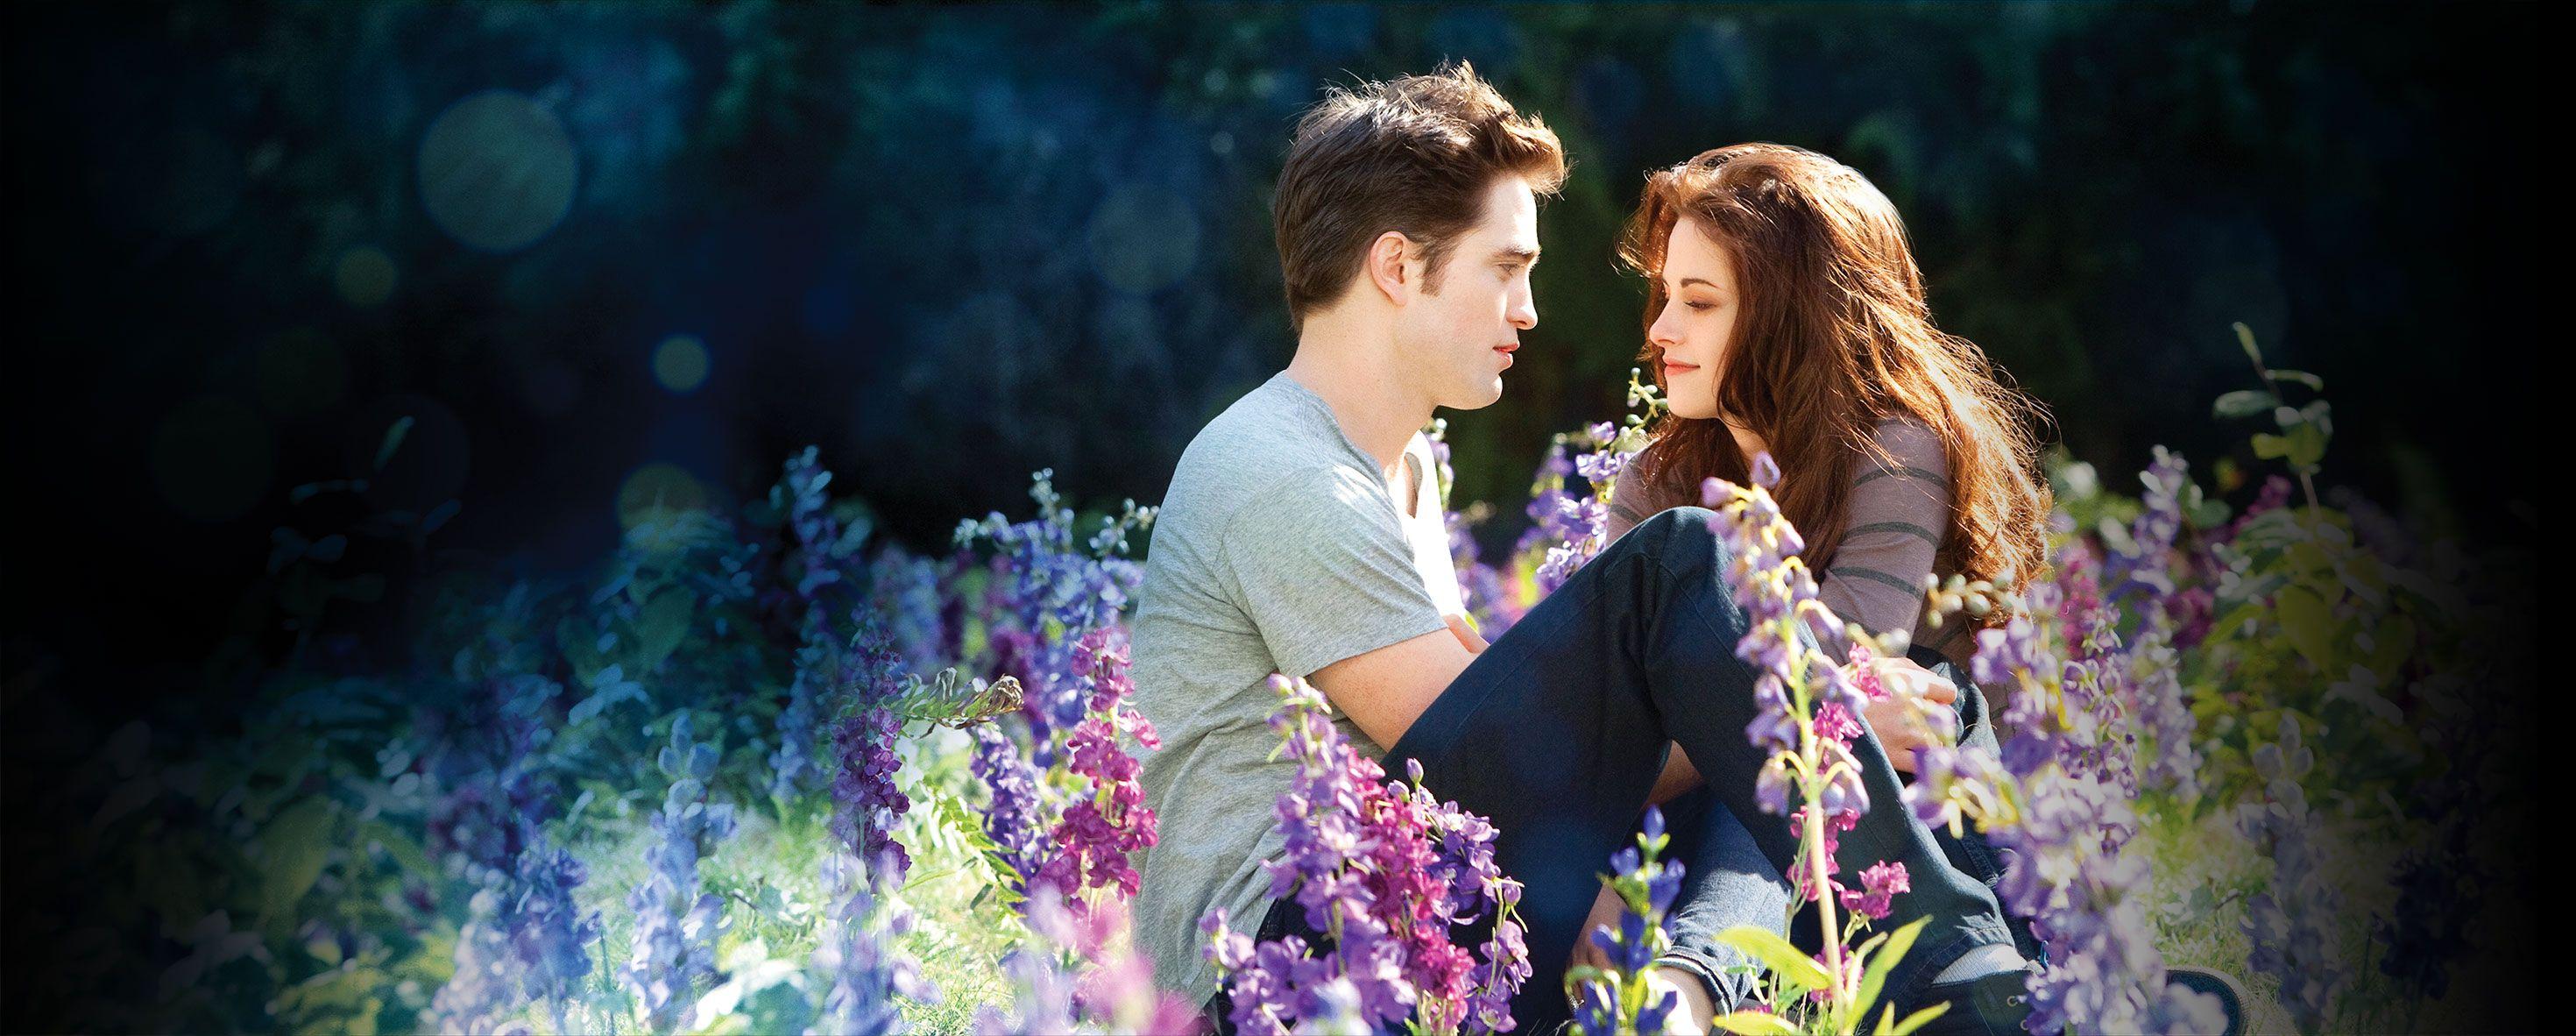 Twilight Bella and Edward. Lady Geek Girl and Friends